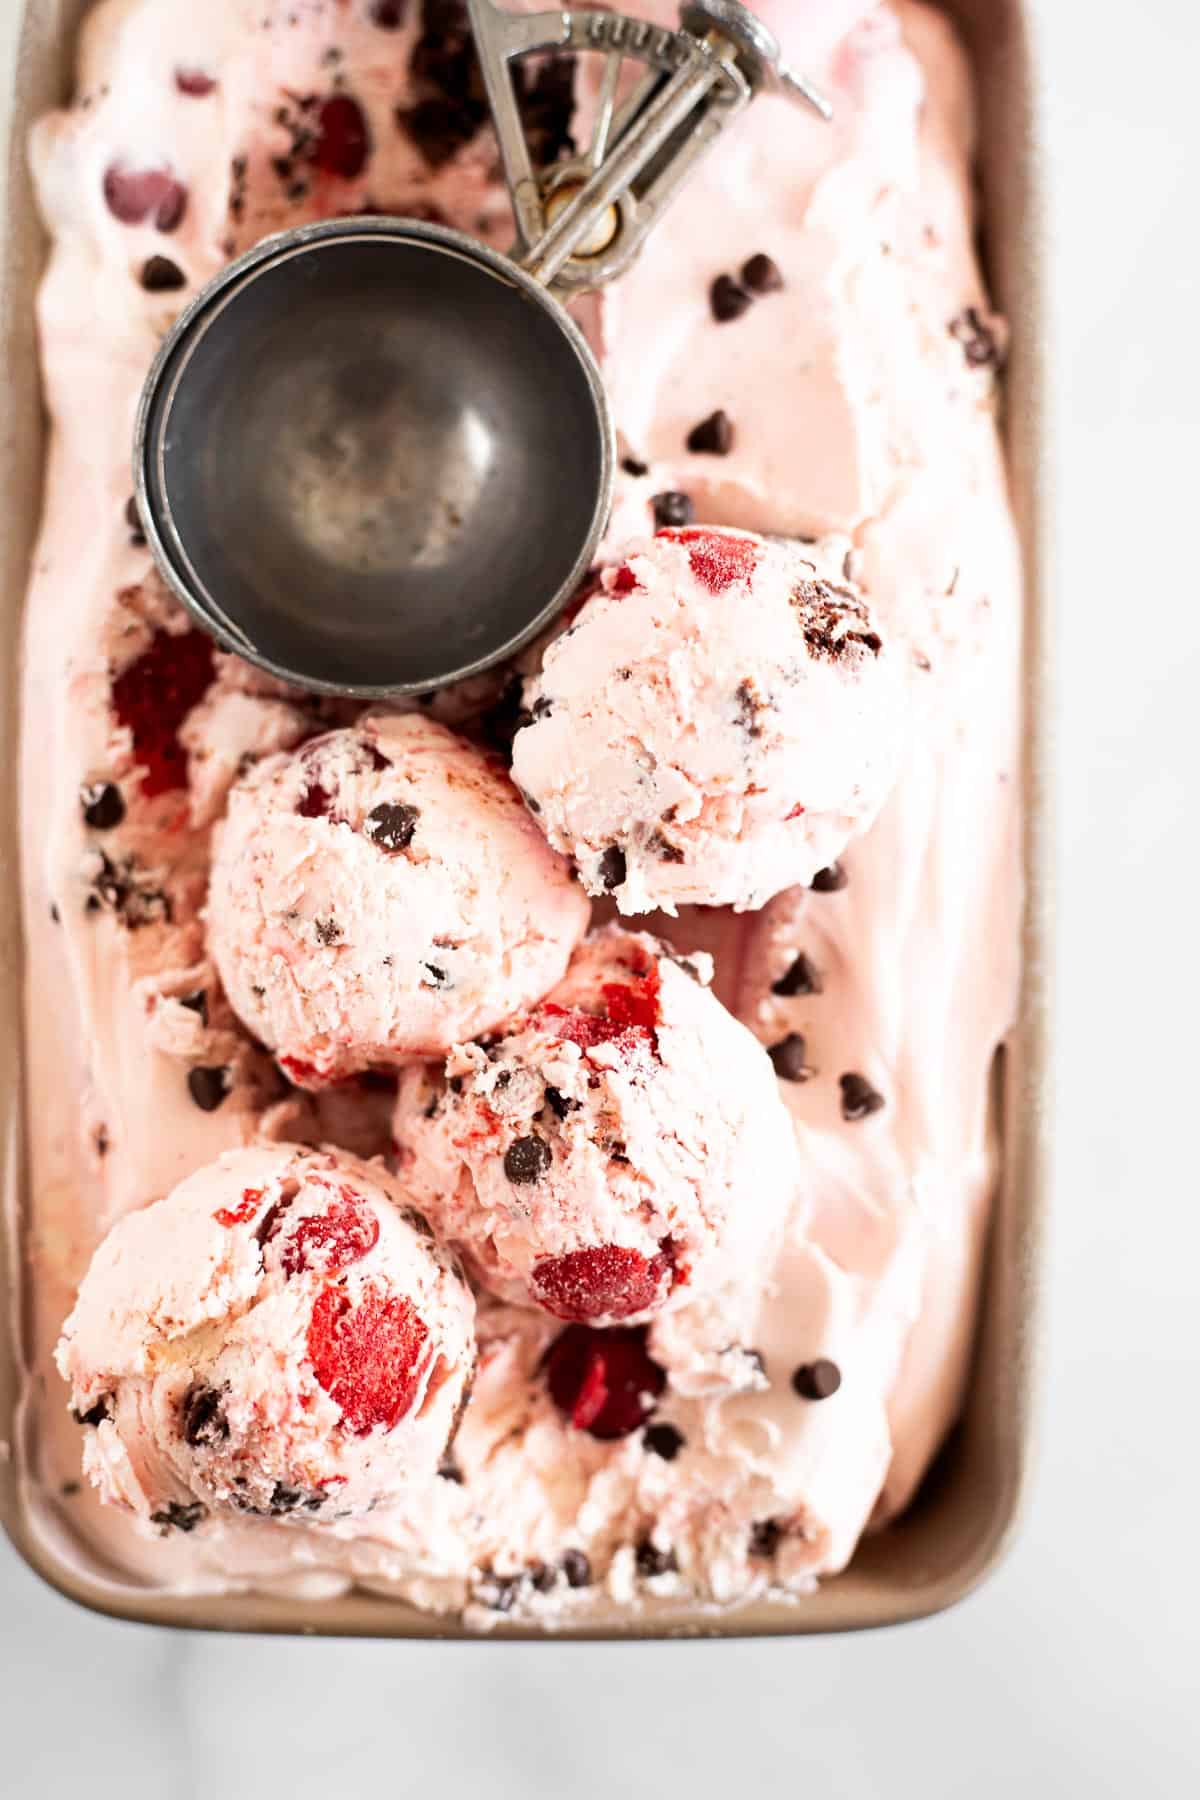 4 scoops of no churn chocolate cherry ice cream in a loaf pan with an ice cream scoop.